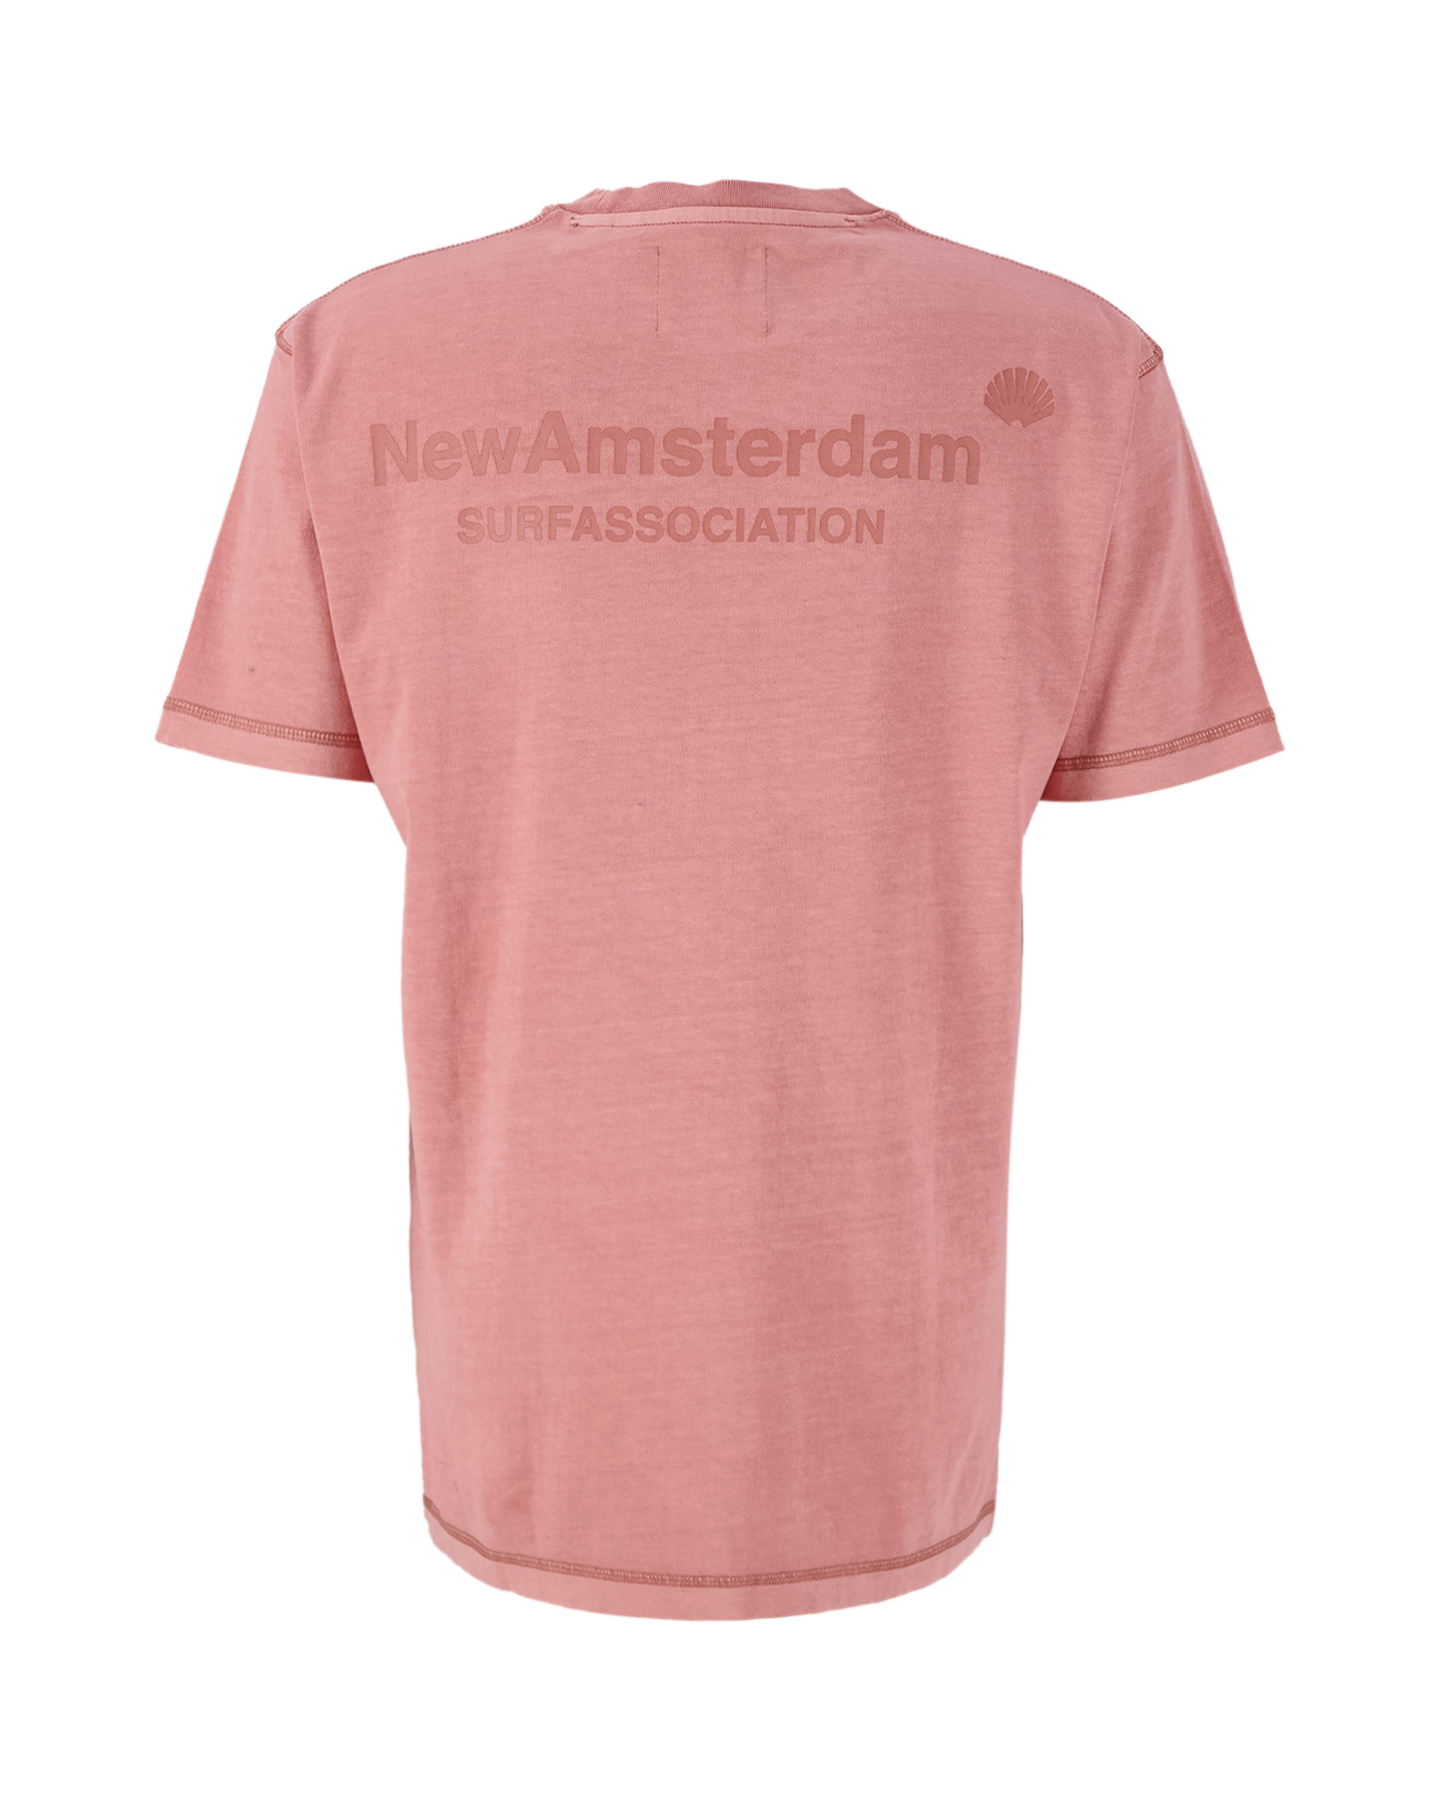 New Amsterdam Surf Association Logo Tee Washed Cameo Brown ROSE 1